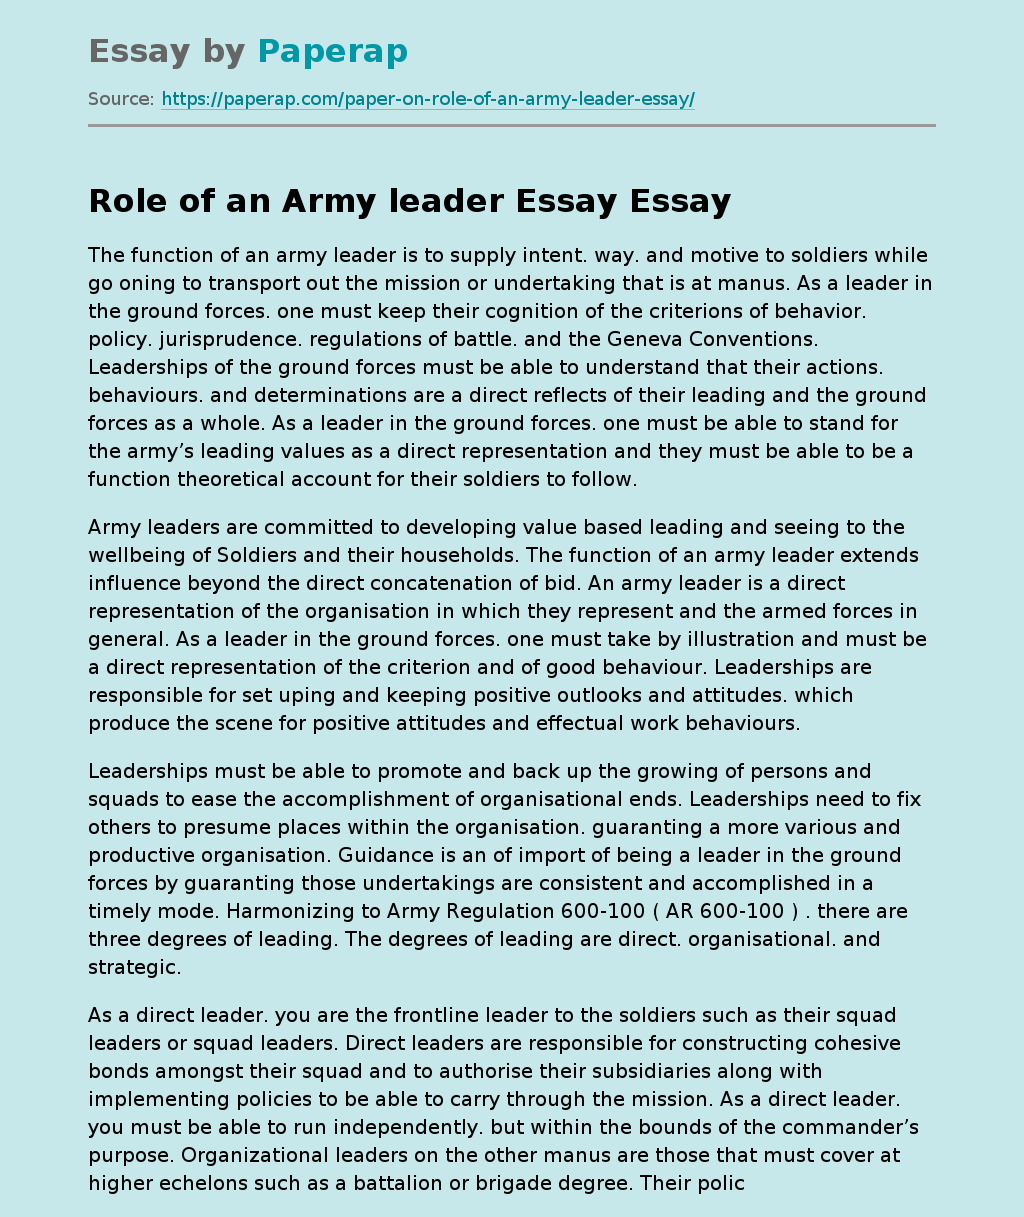 Role of an Army leader Essay